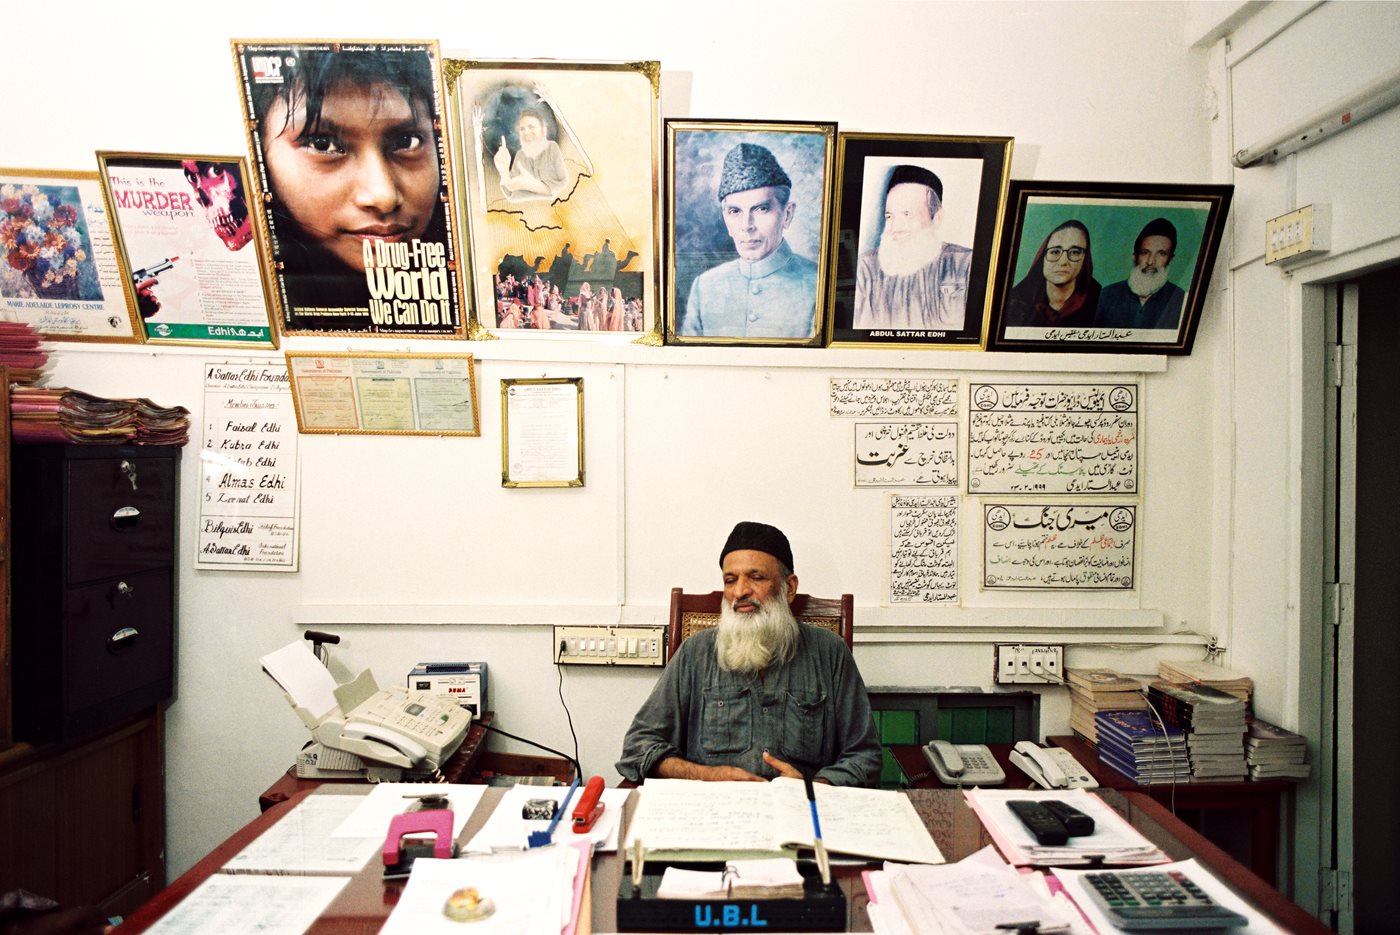 Abdul Sattar Edhi sits at his desk in the Mithadar district of Karachi. His office is the same building where, in 1951, he opened his first free pharmacy, and he remains personally on call: &quot;I am always available to all,&quot; he said.